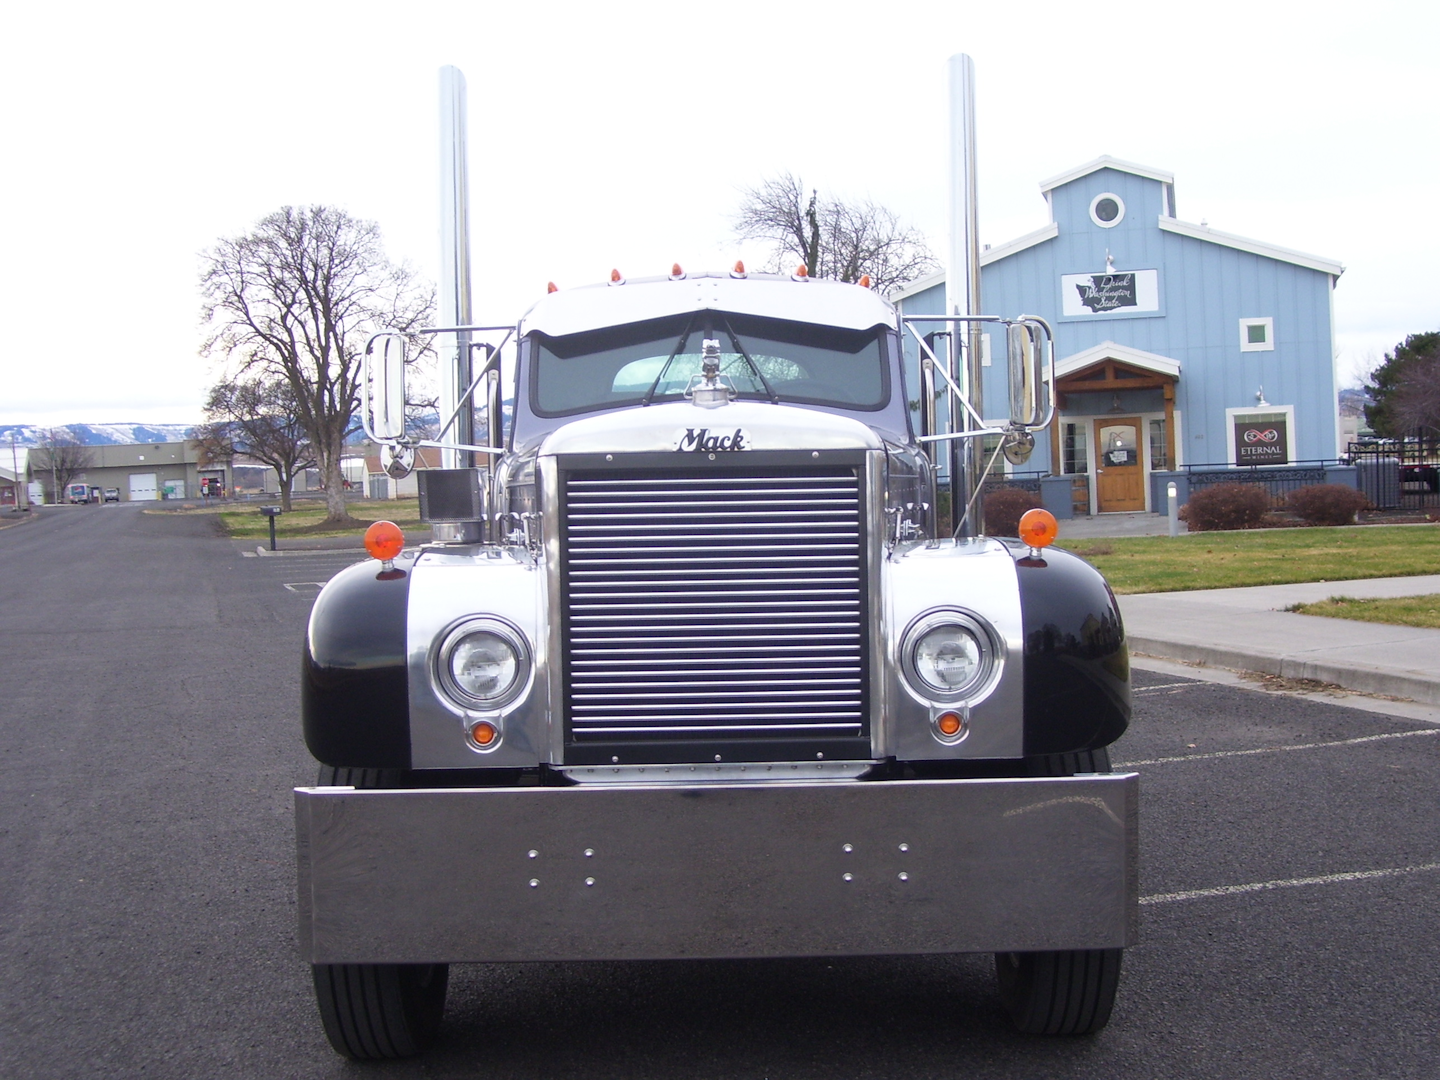 Many parts of the truck were hand-built by Flake, including the grille and bumper. The Mack bulldog on top of the hood, however, is one of few parts on the truck that are original.